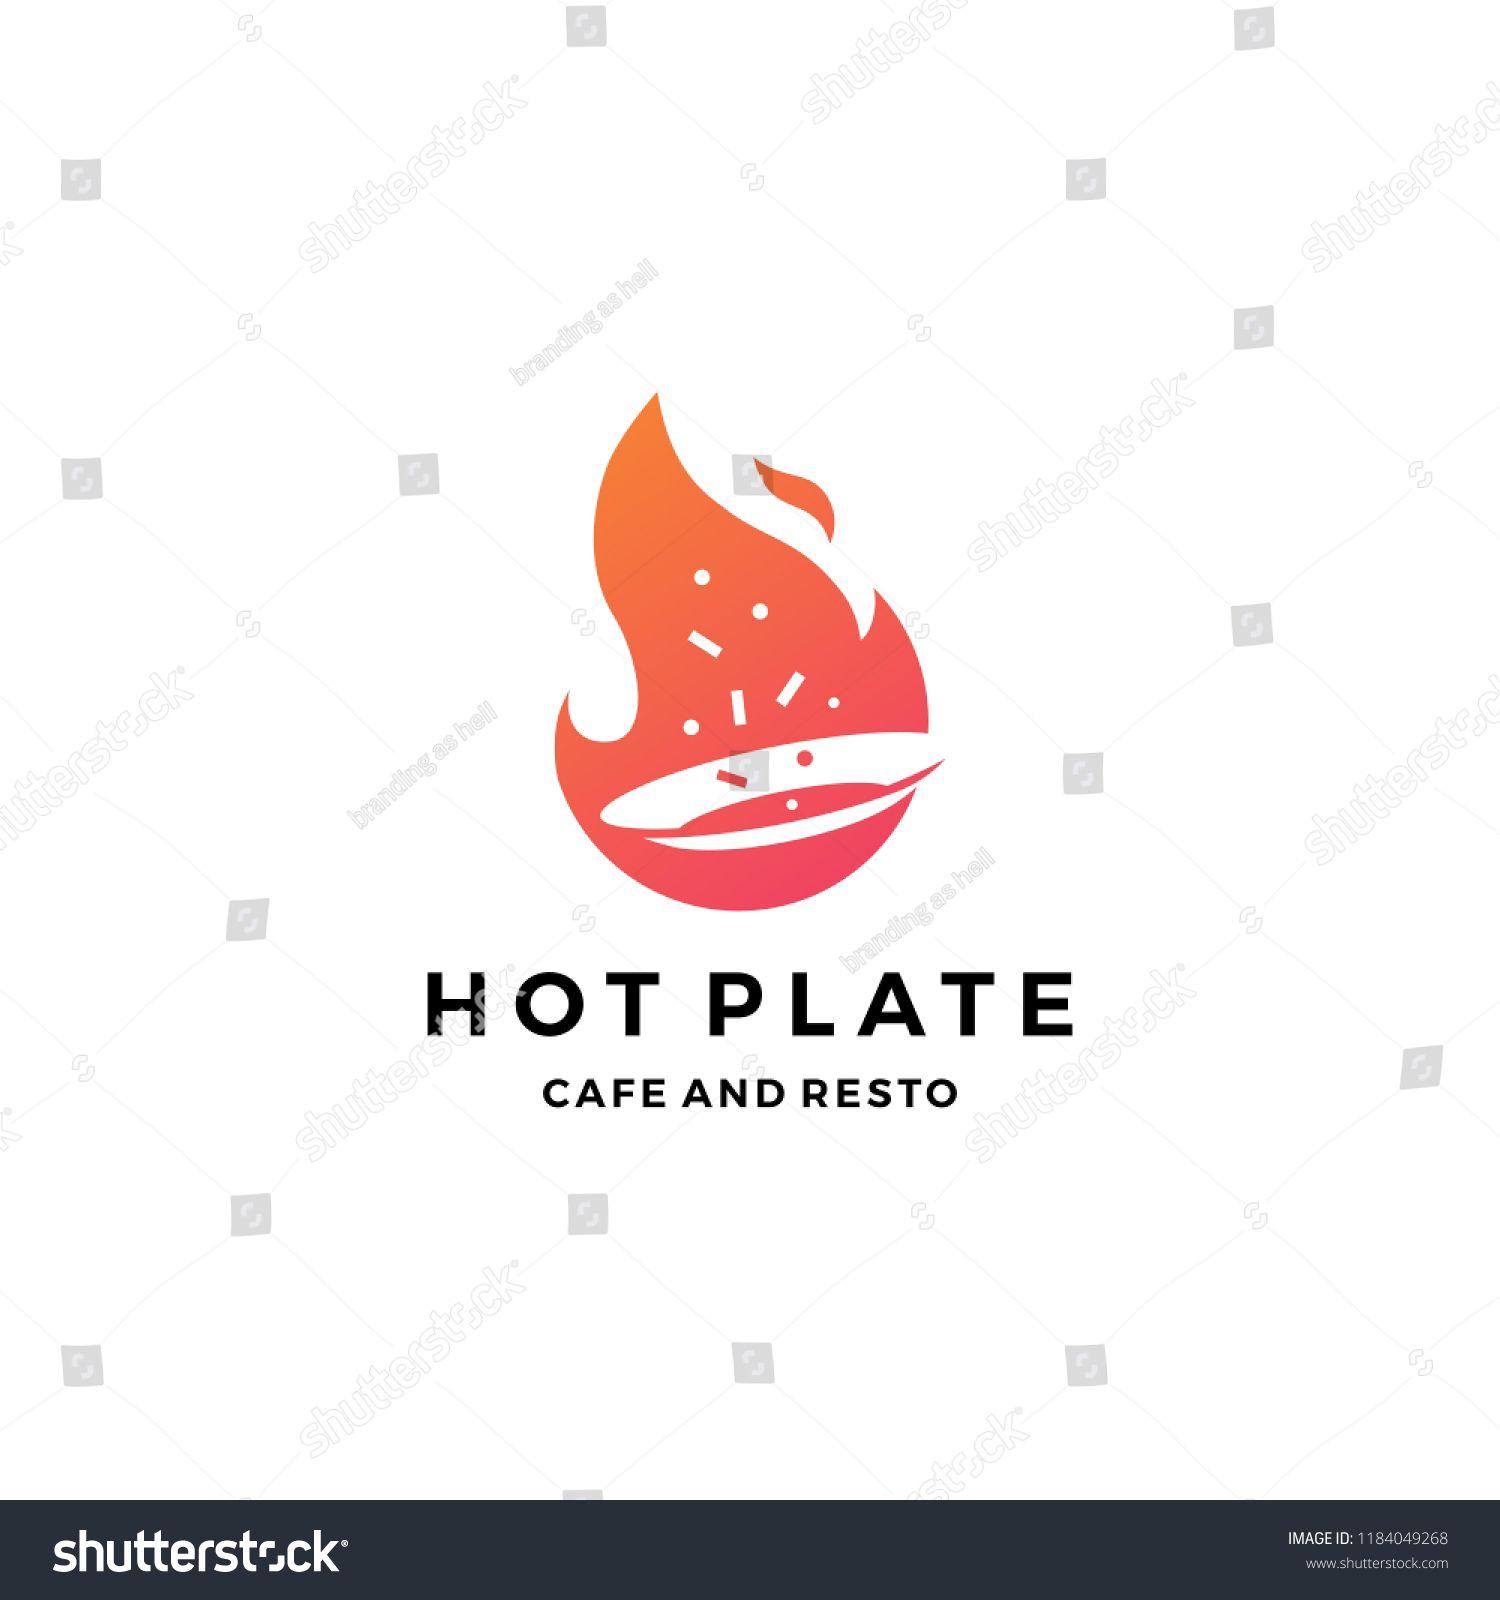 Flame Orange with Black Logo - fire flame hot plate logo icon #plate, #hot, #cooking, #food ...